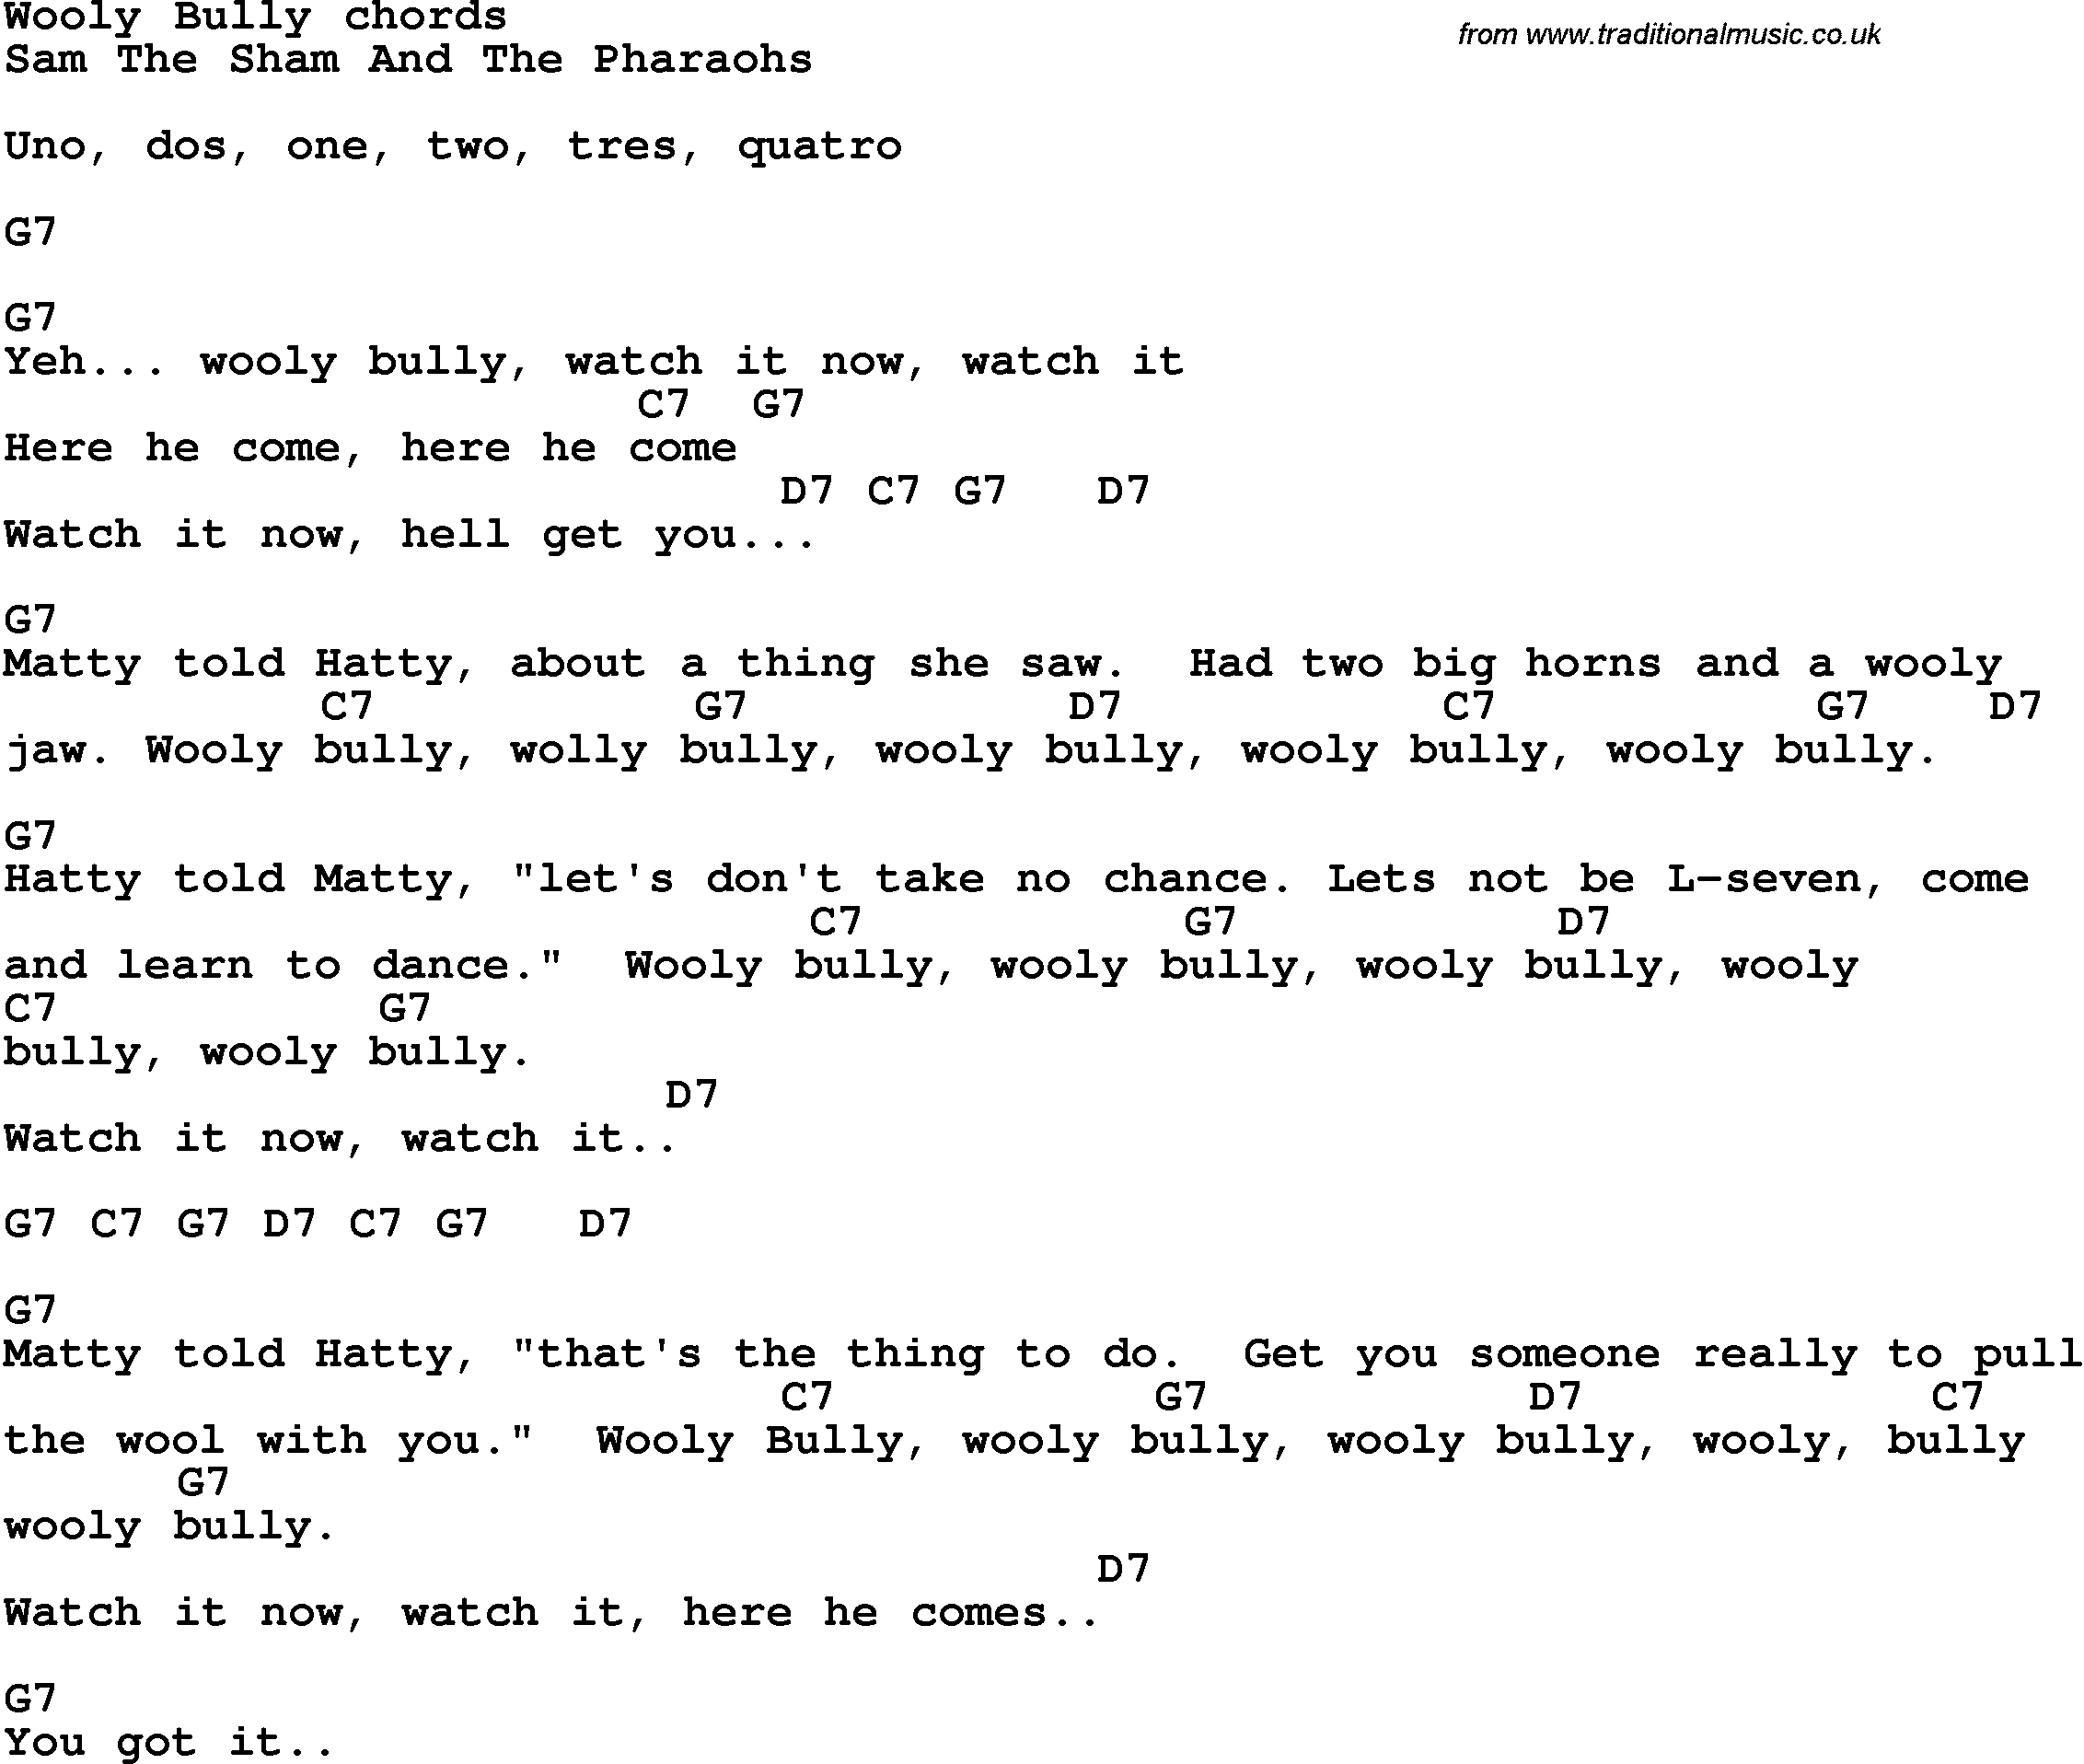 Song Lyrics with guitar chords for Wooly Bully